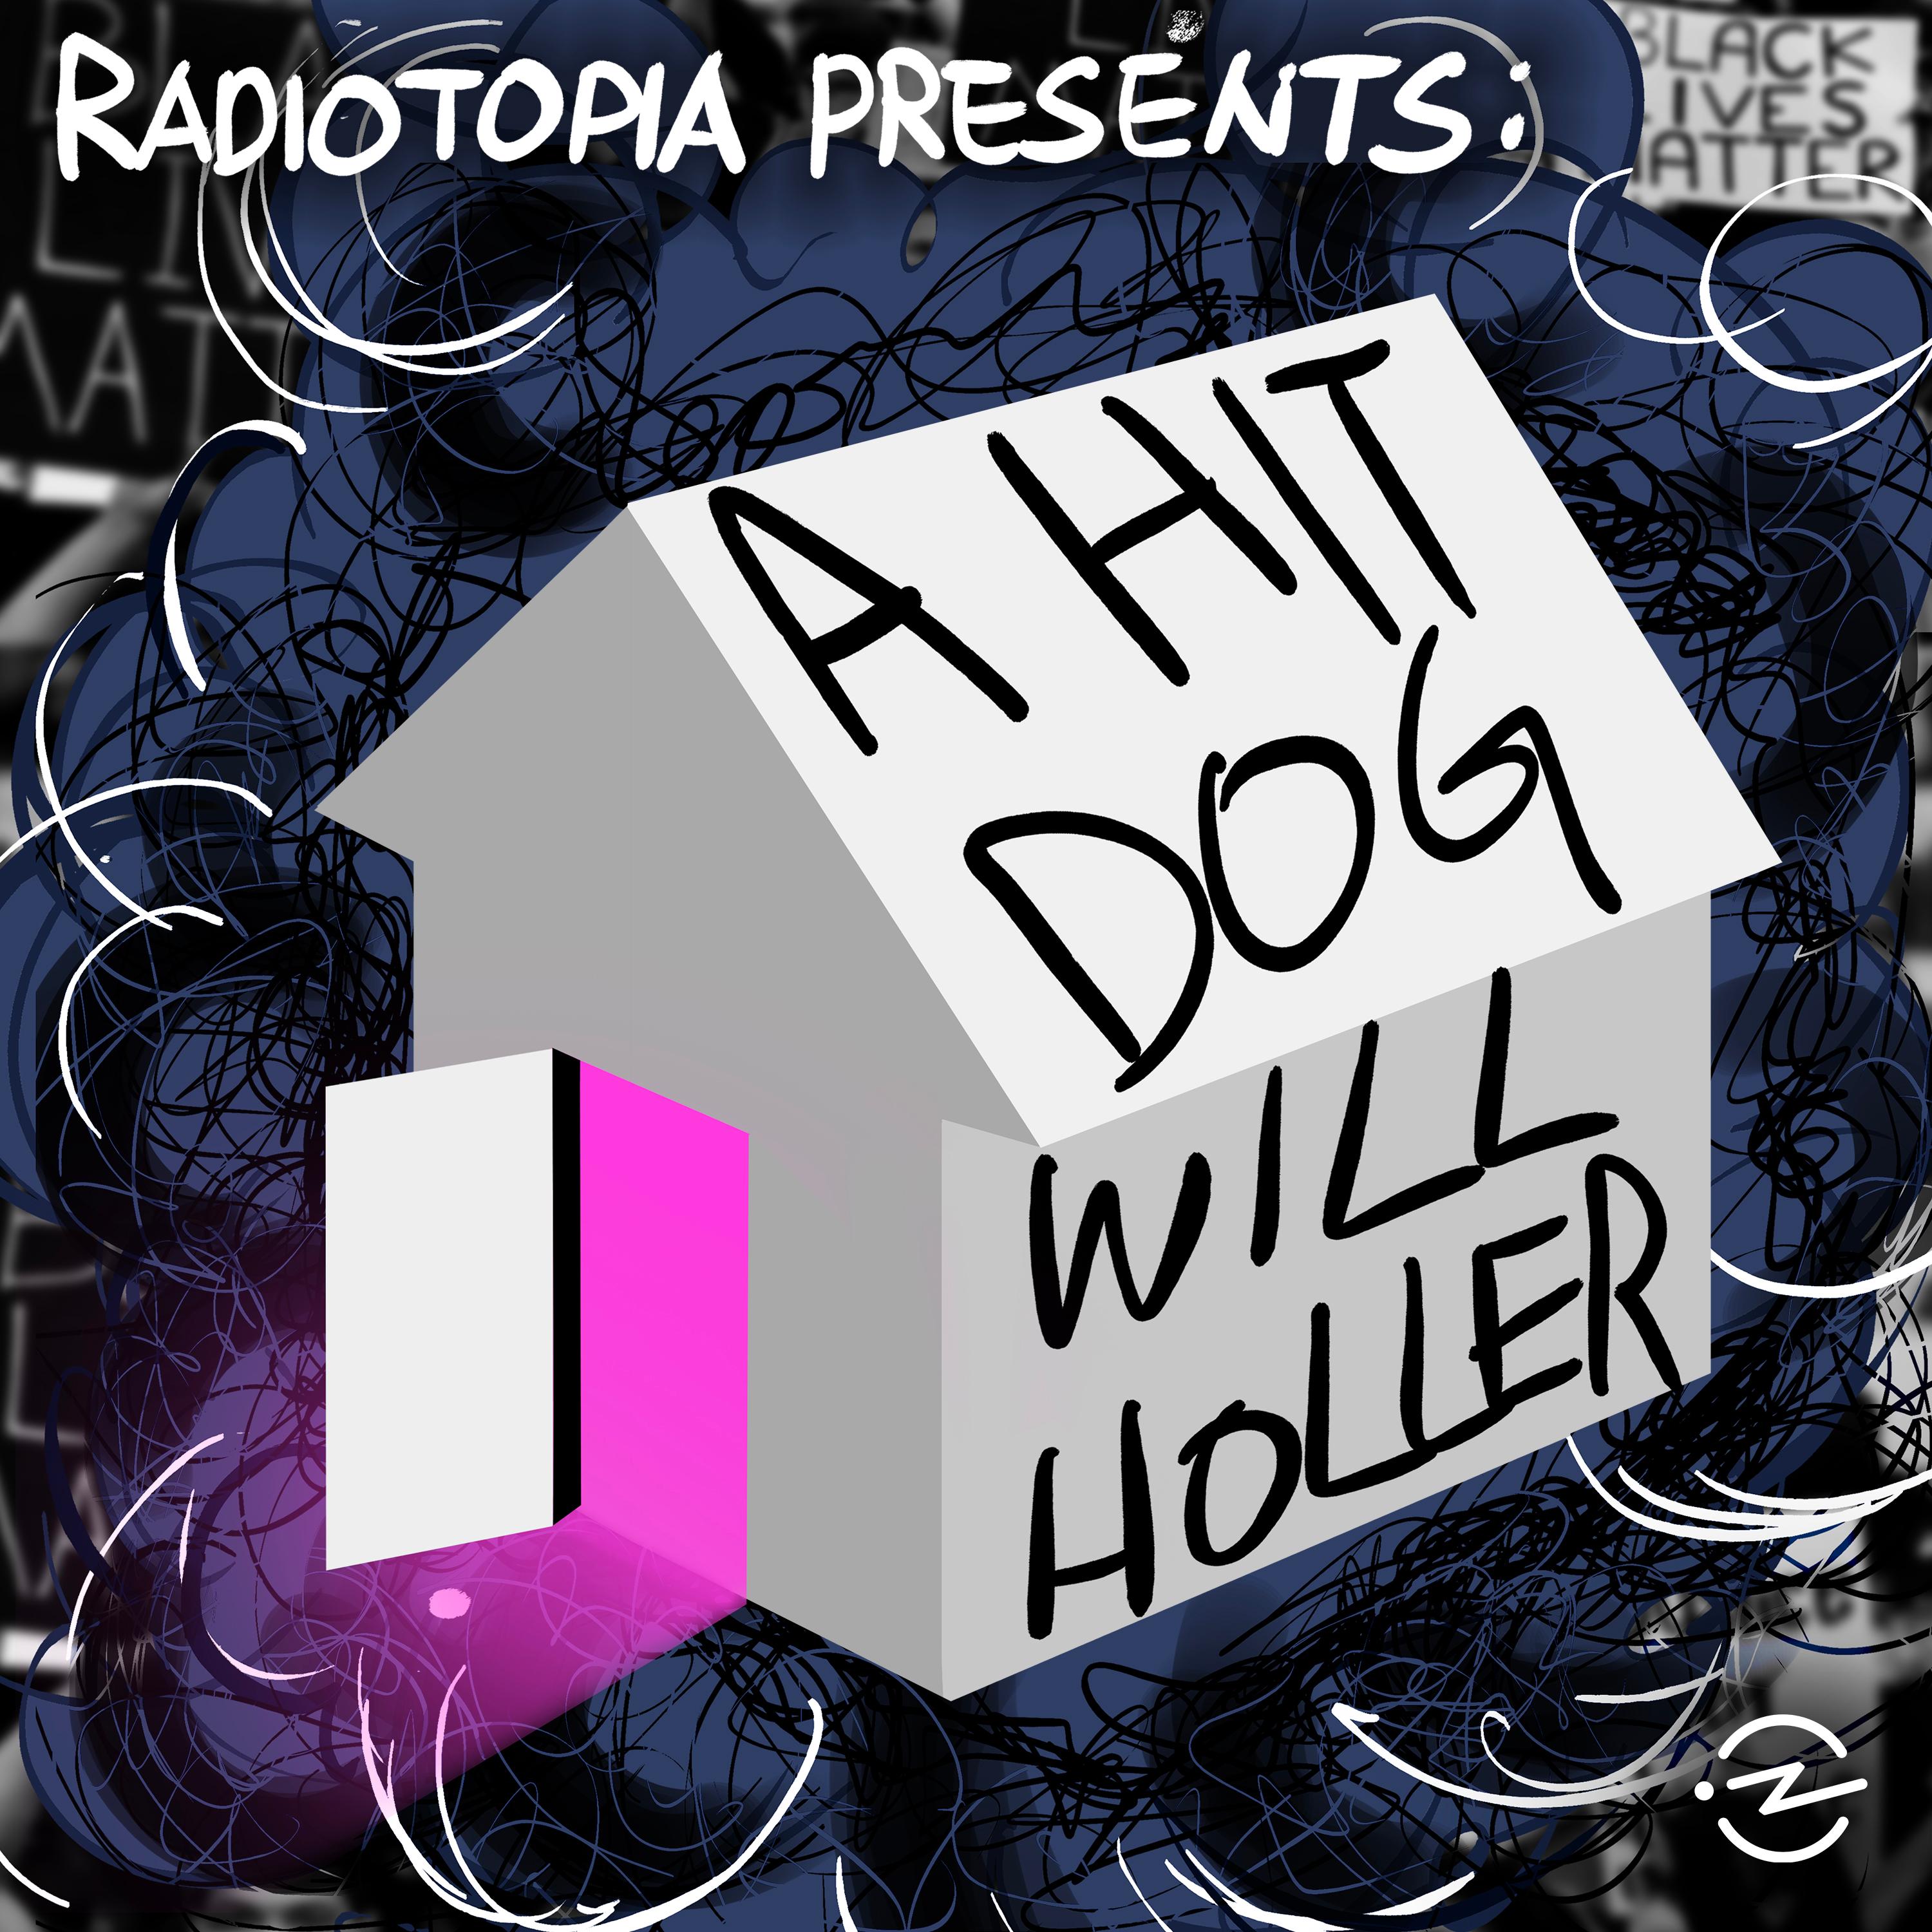 Thumbnail for "a hit dog will holler 4 - every black person".